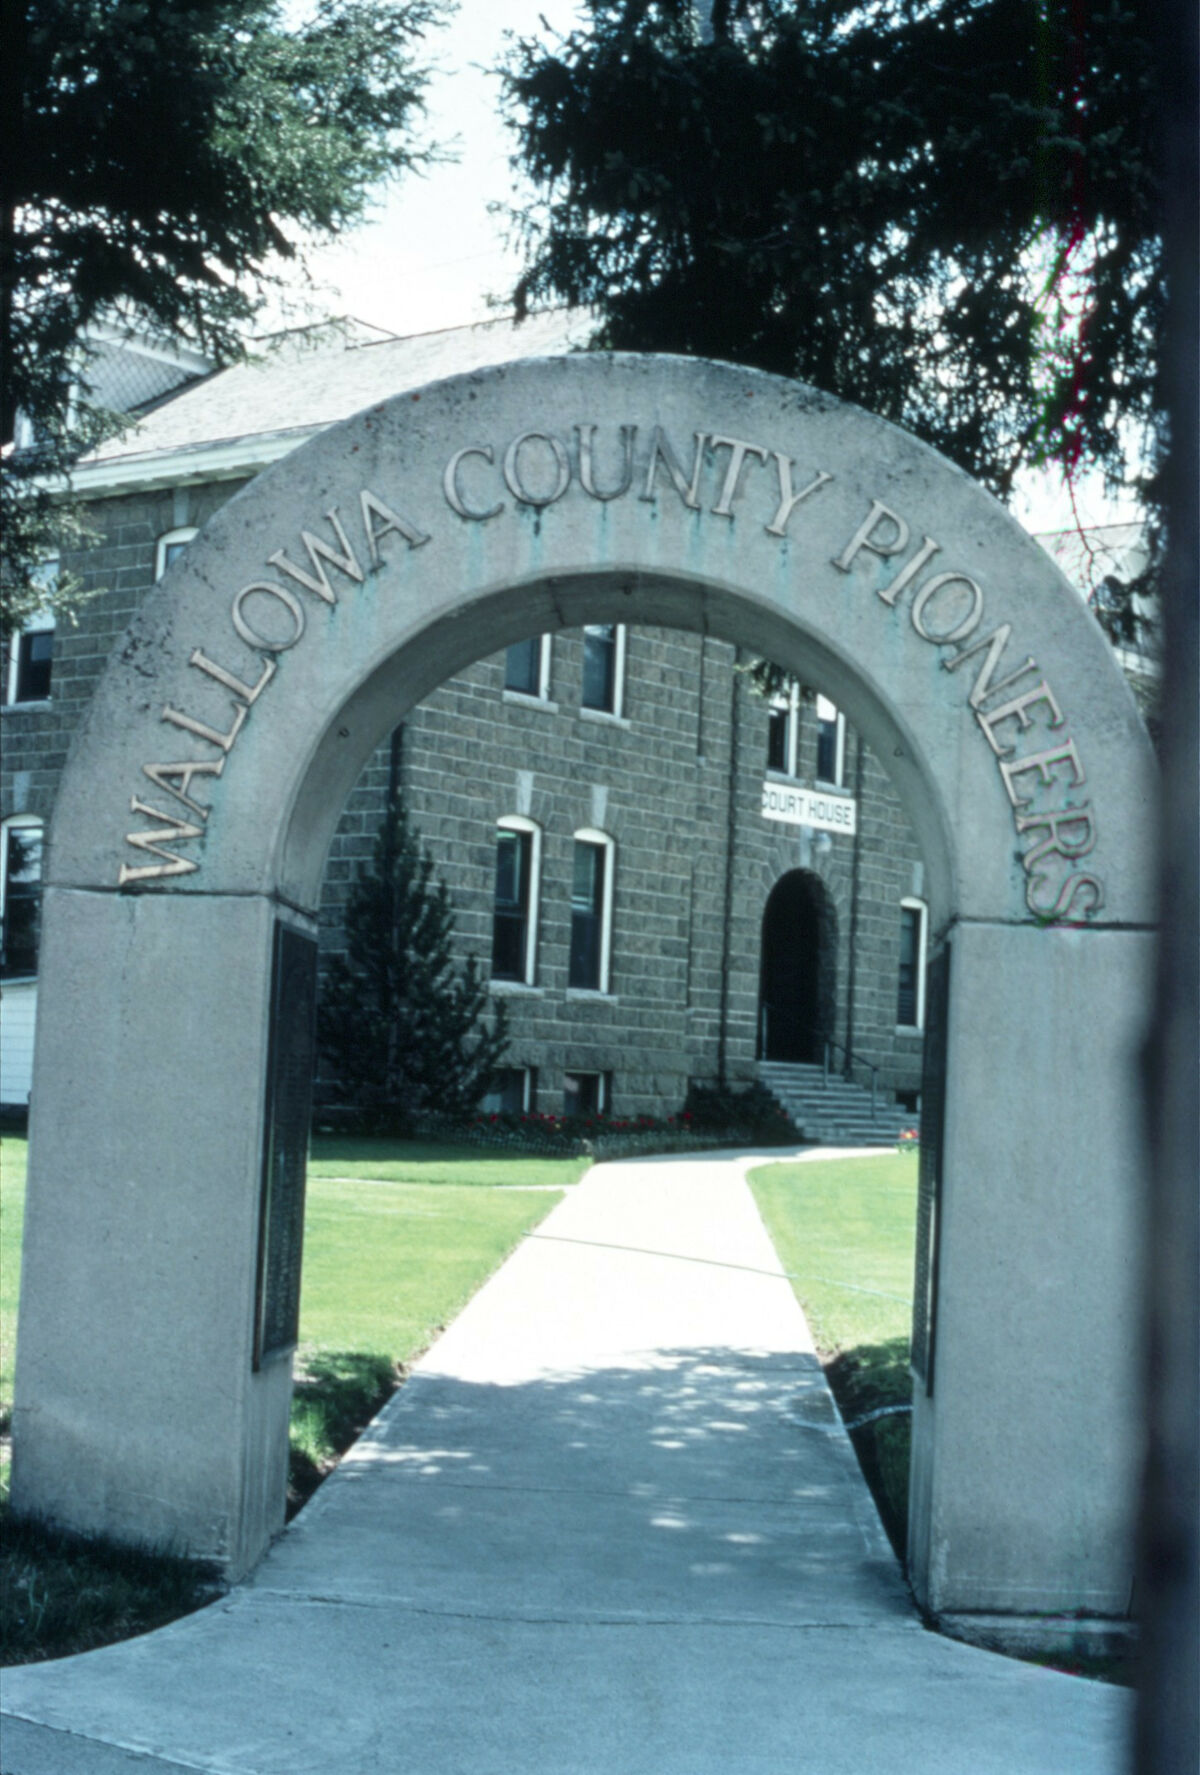 The Wallowa County Pioneers arch at the Wallowa County Courthouse in Enterprise. Taken by Janie Tippett.